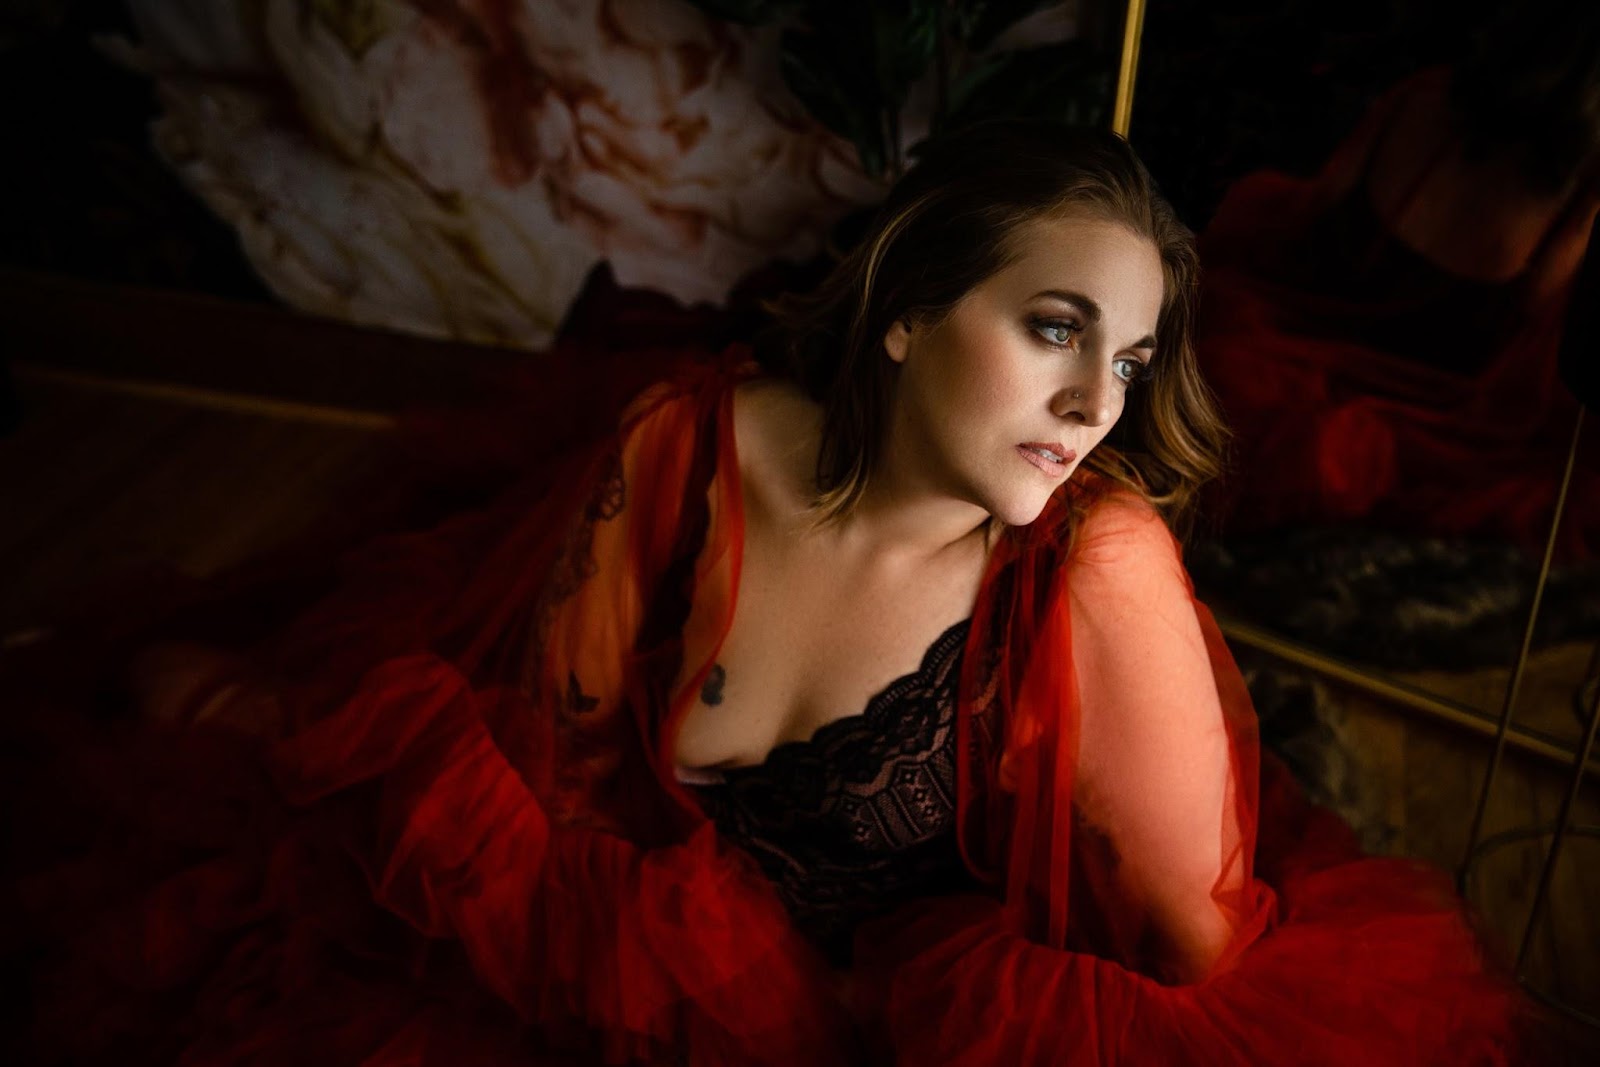 Boudoir by Naomi was started by Naomi Hormann, a creative boudoir photographer serving customers from Indiana, Ohio, Kentucky, Michigan, and beyond.